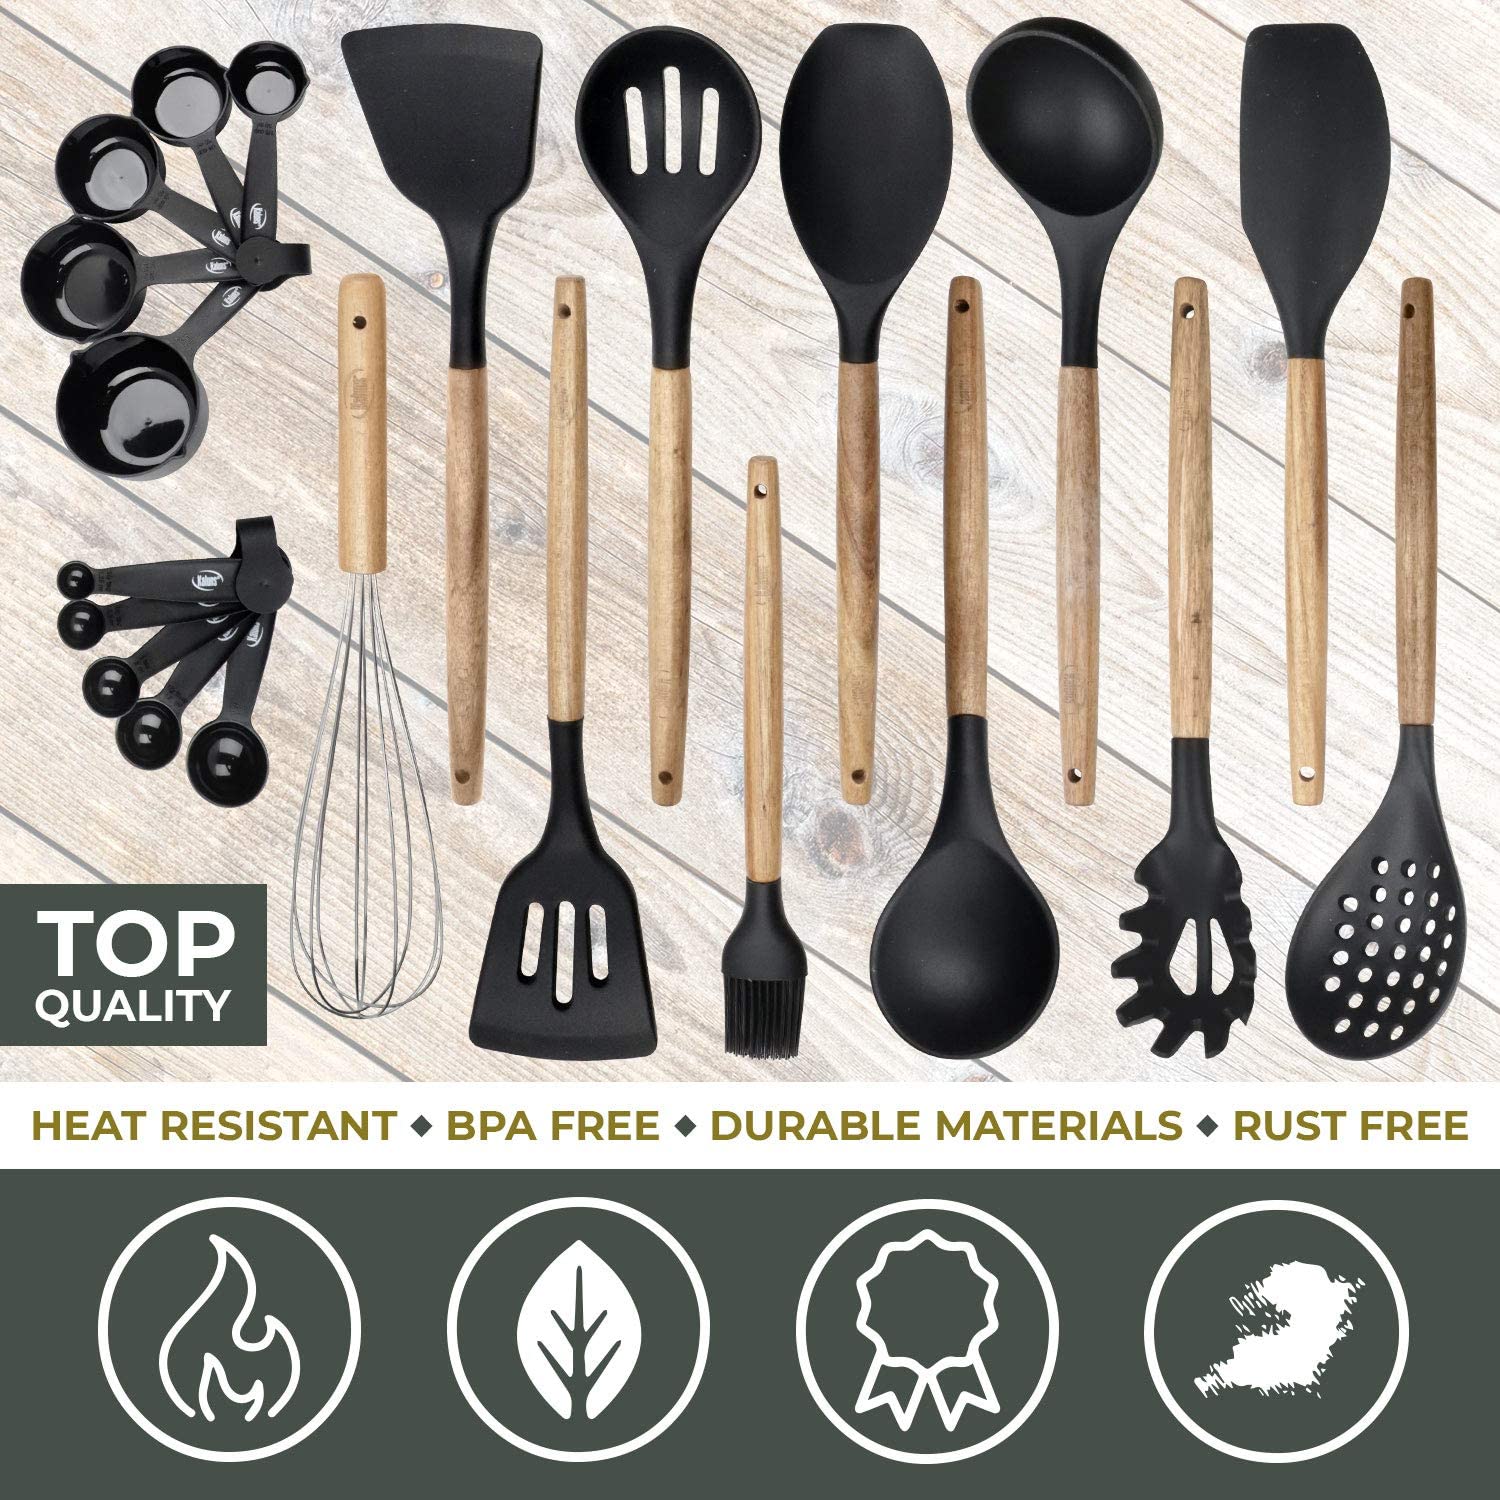 21 Piece Wooden Silicone Cooking Utensil Set – kaluns®